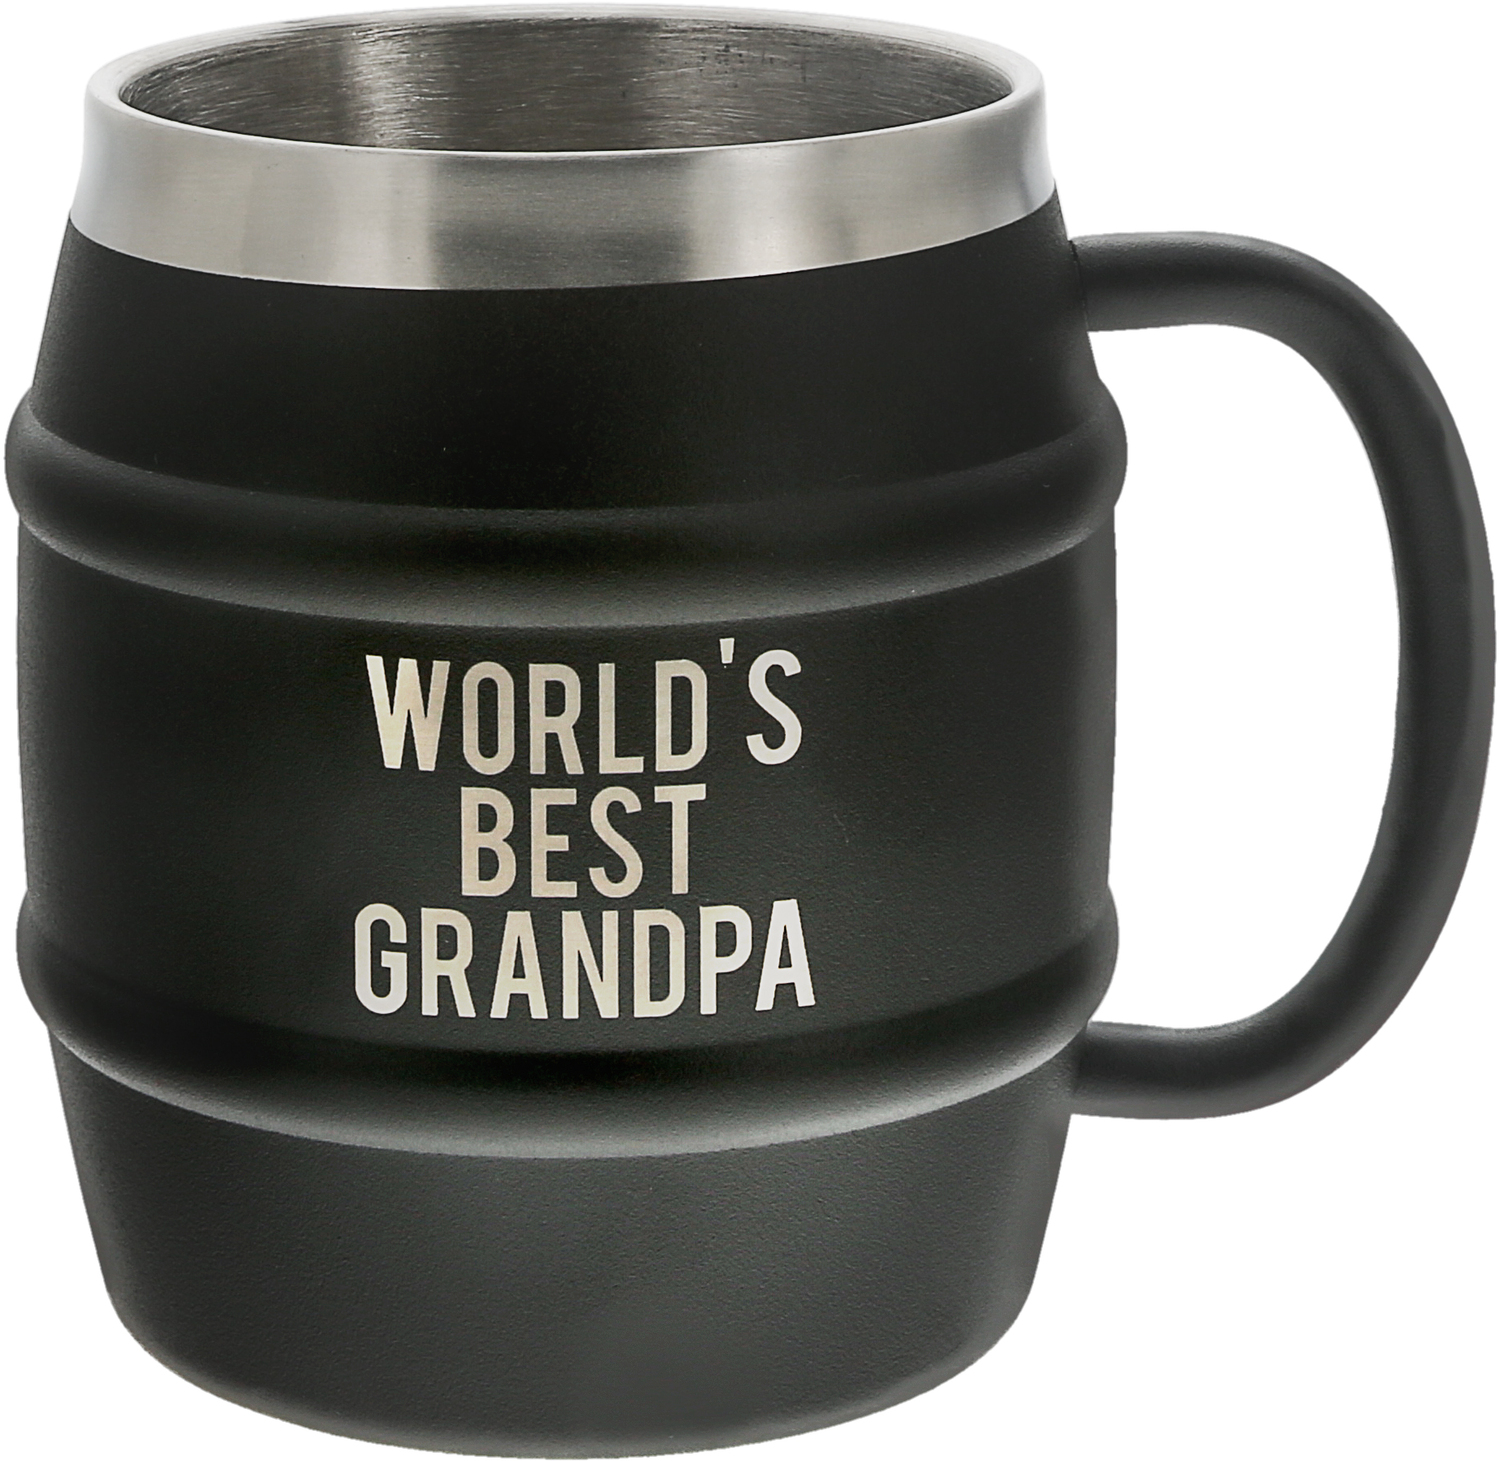 Grandpa by Man Made - Grandpa - 15 oz Stainless Steel Double Wall Stein